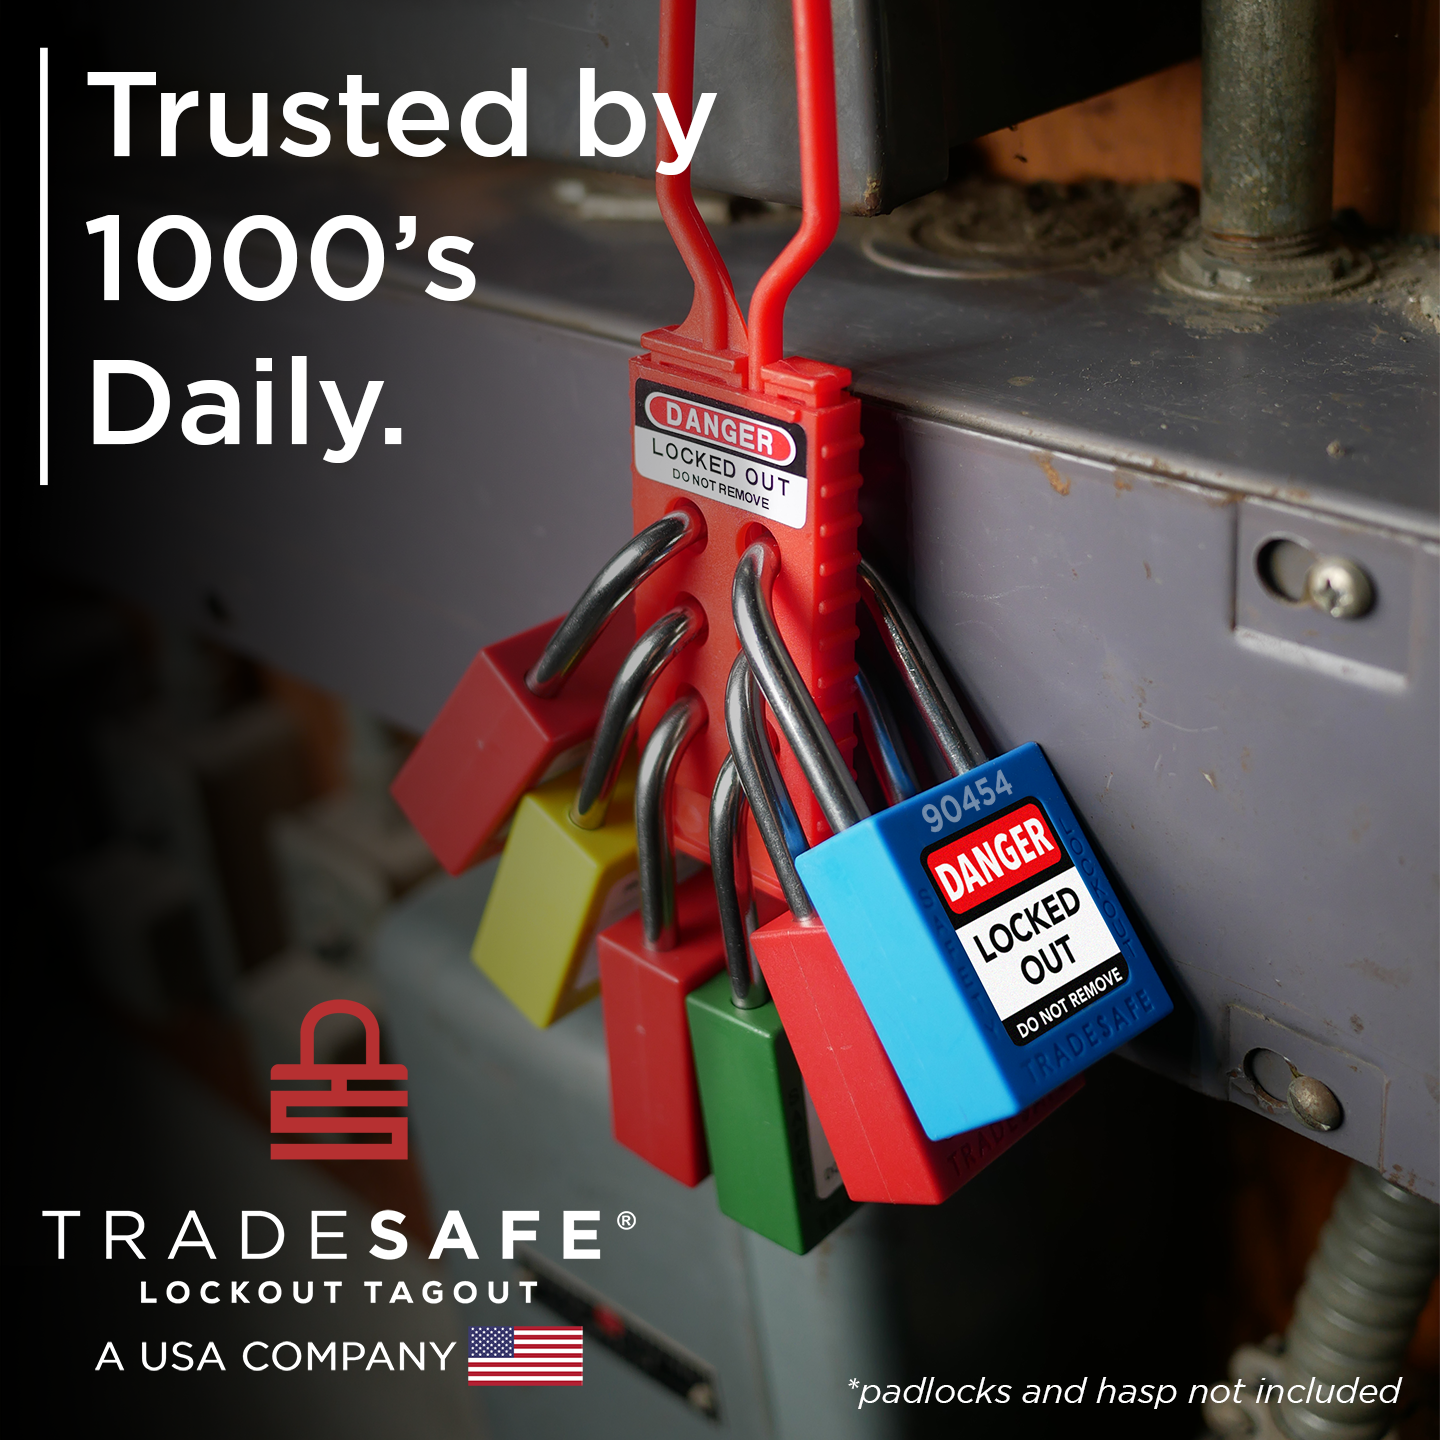 tradesafe: trusted by 1000's daily